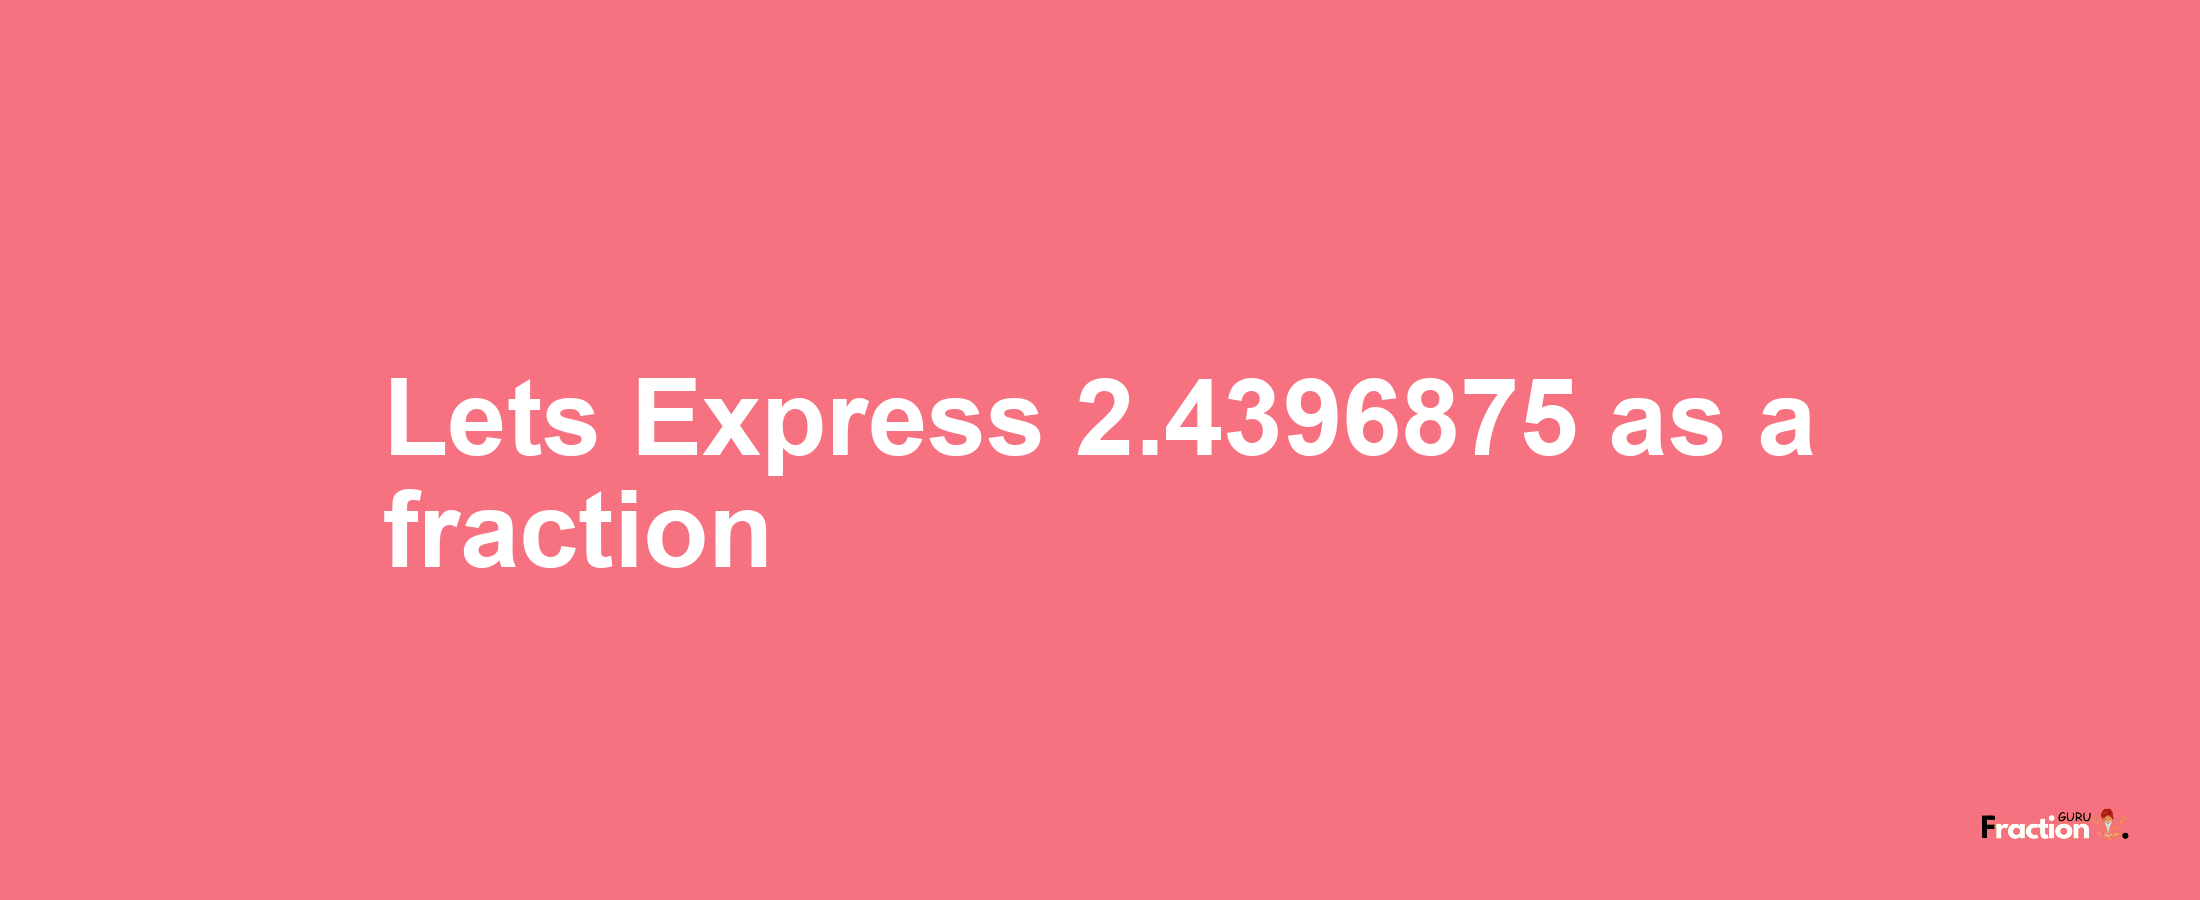 Lets Express 2.4396875 as afraction